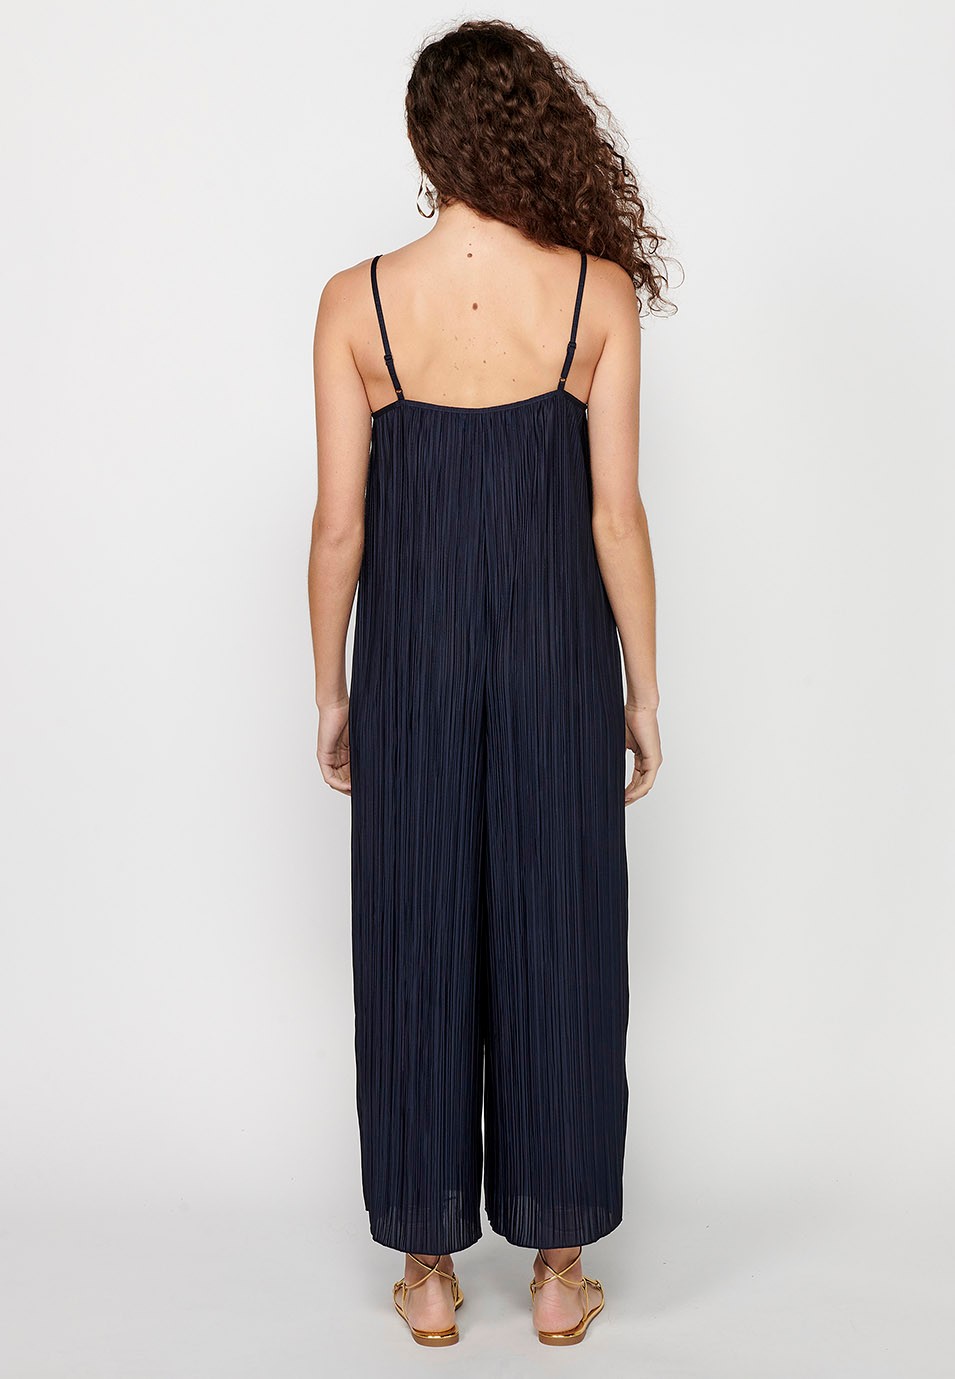 Women's Loose Fabric Jumpsuit Dress with Folds and Adjustable Blue Straps 7